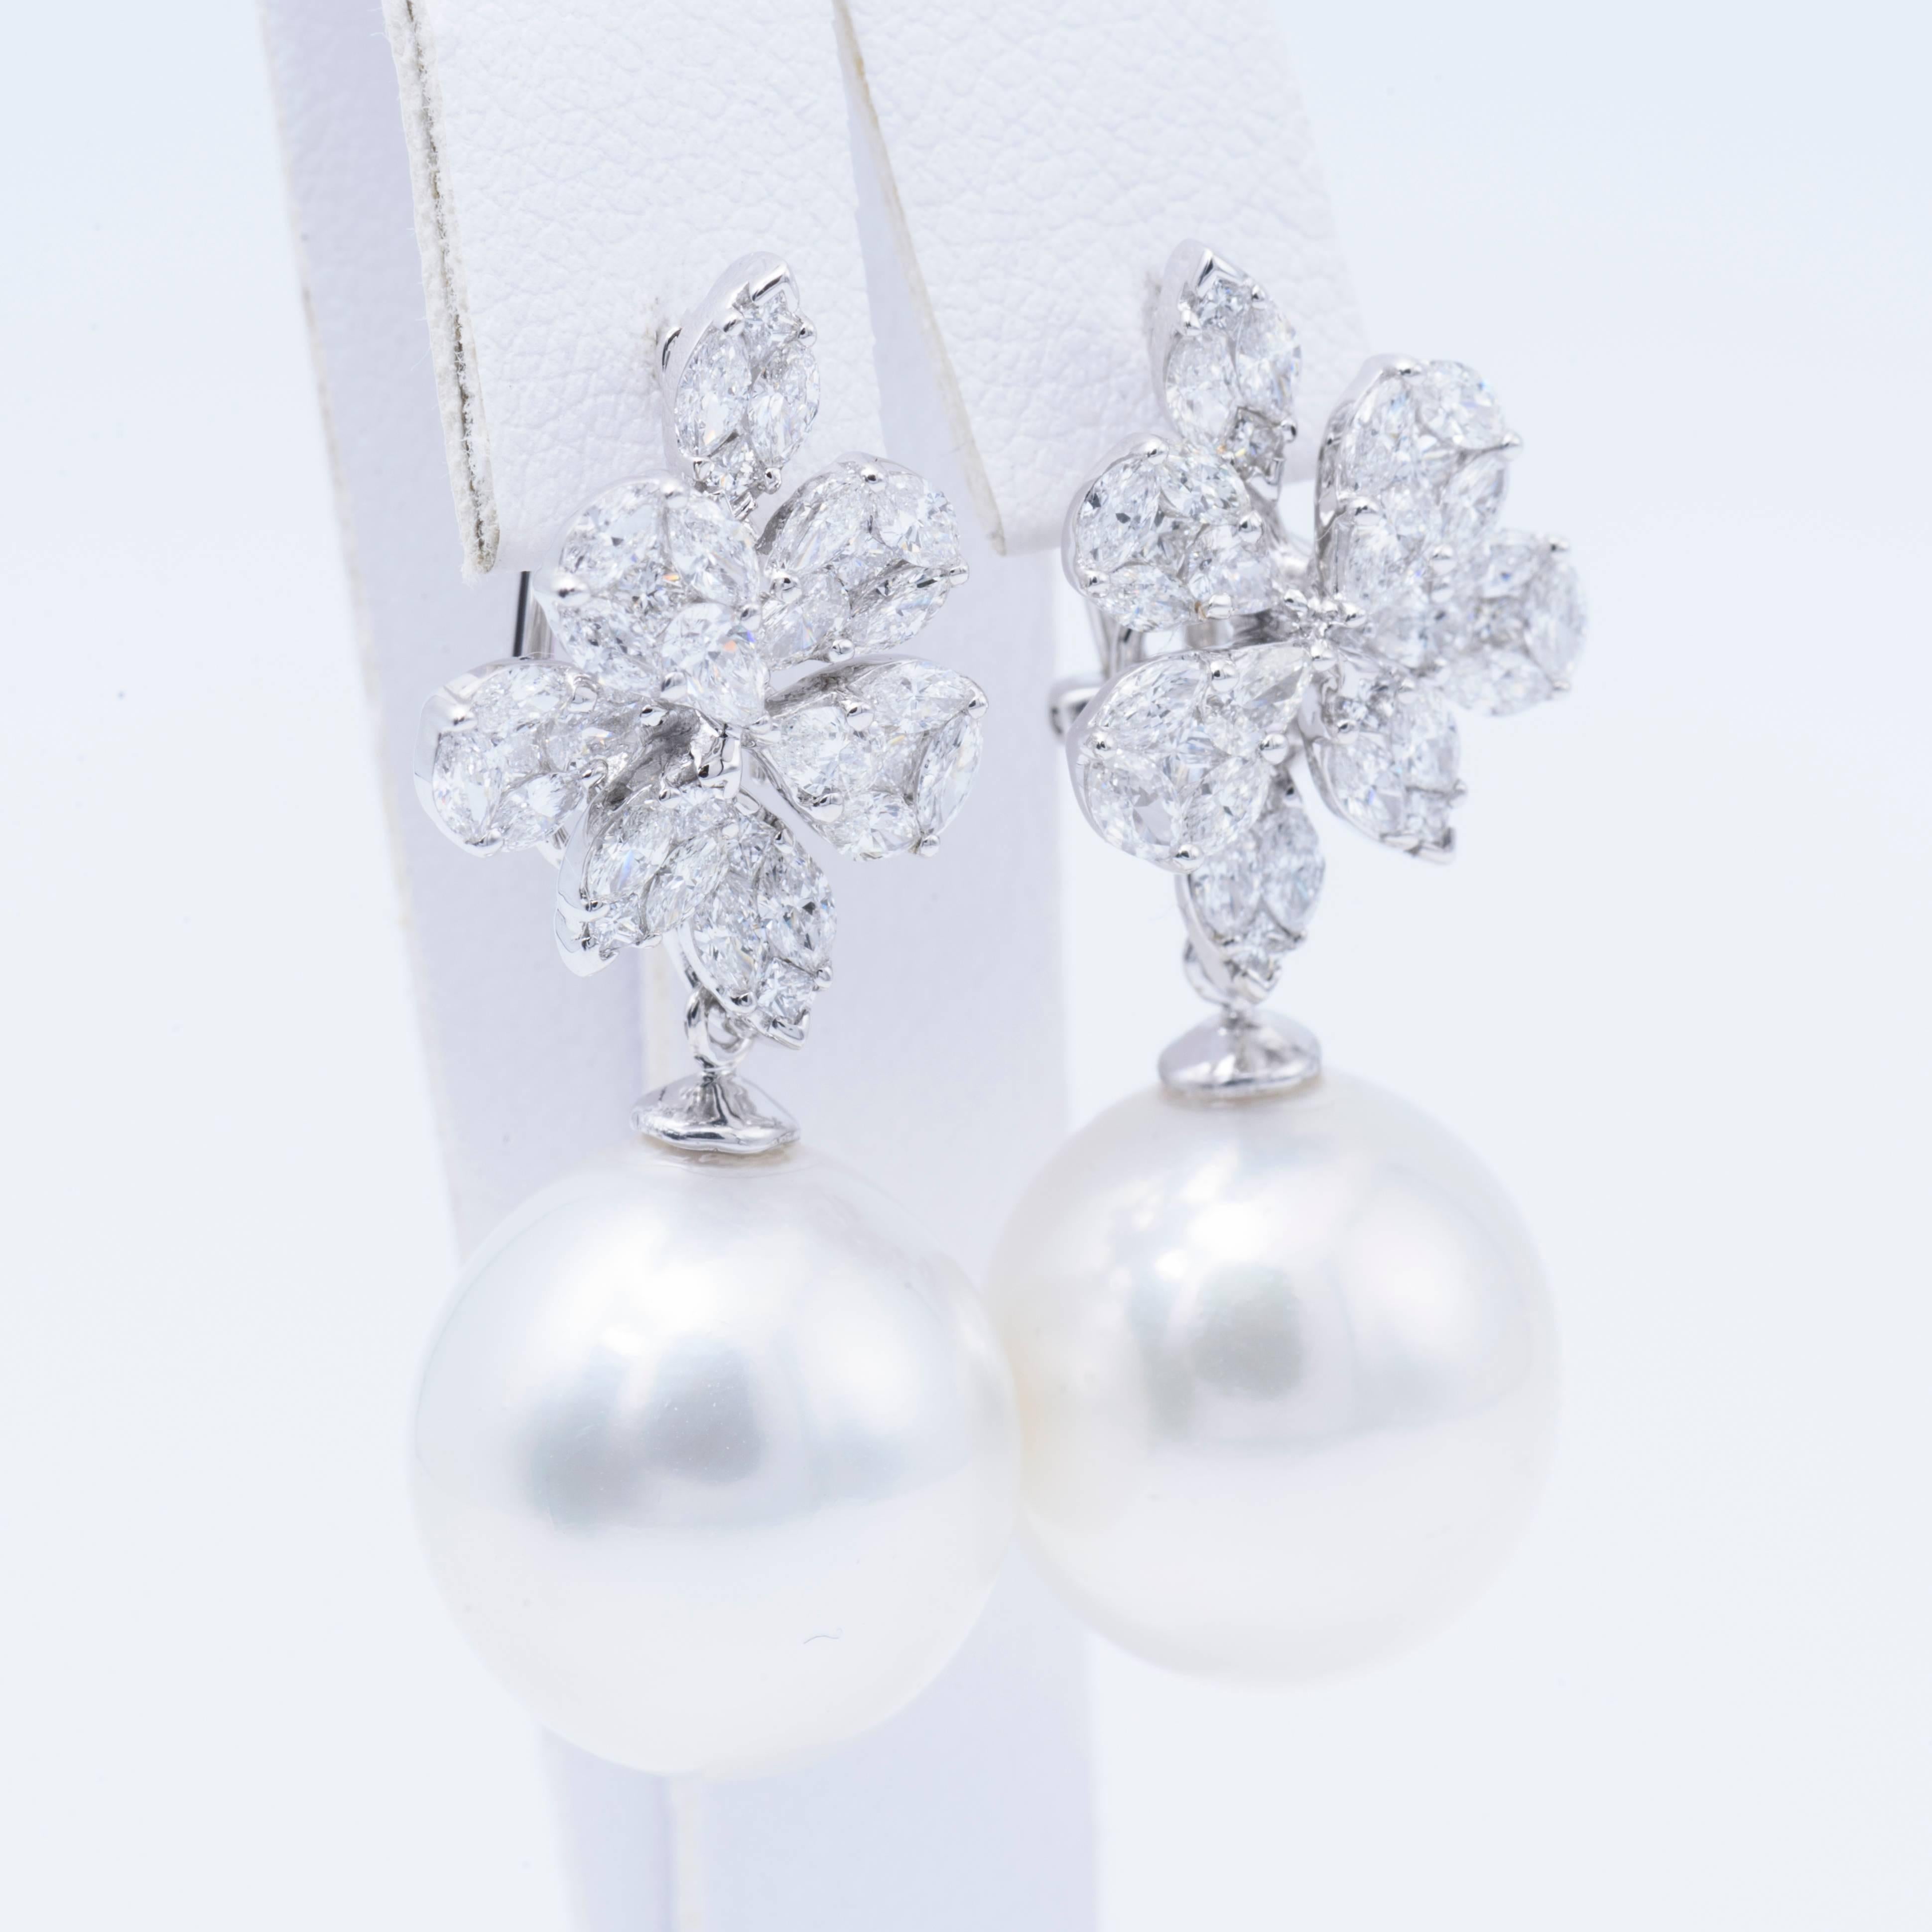 18K White gold earrings featuring two South Sea Pearl measuring 14-15 mm with a diamond cluster top of marquise, pear, princess and round brilliants weighing 2.14 carats.  
Color: H
Clarity: VS 
